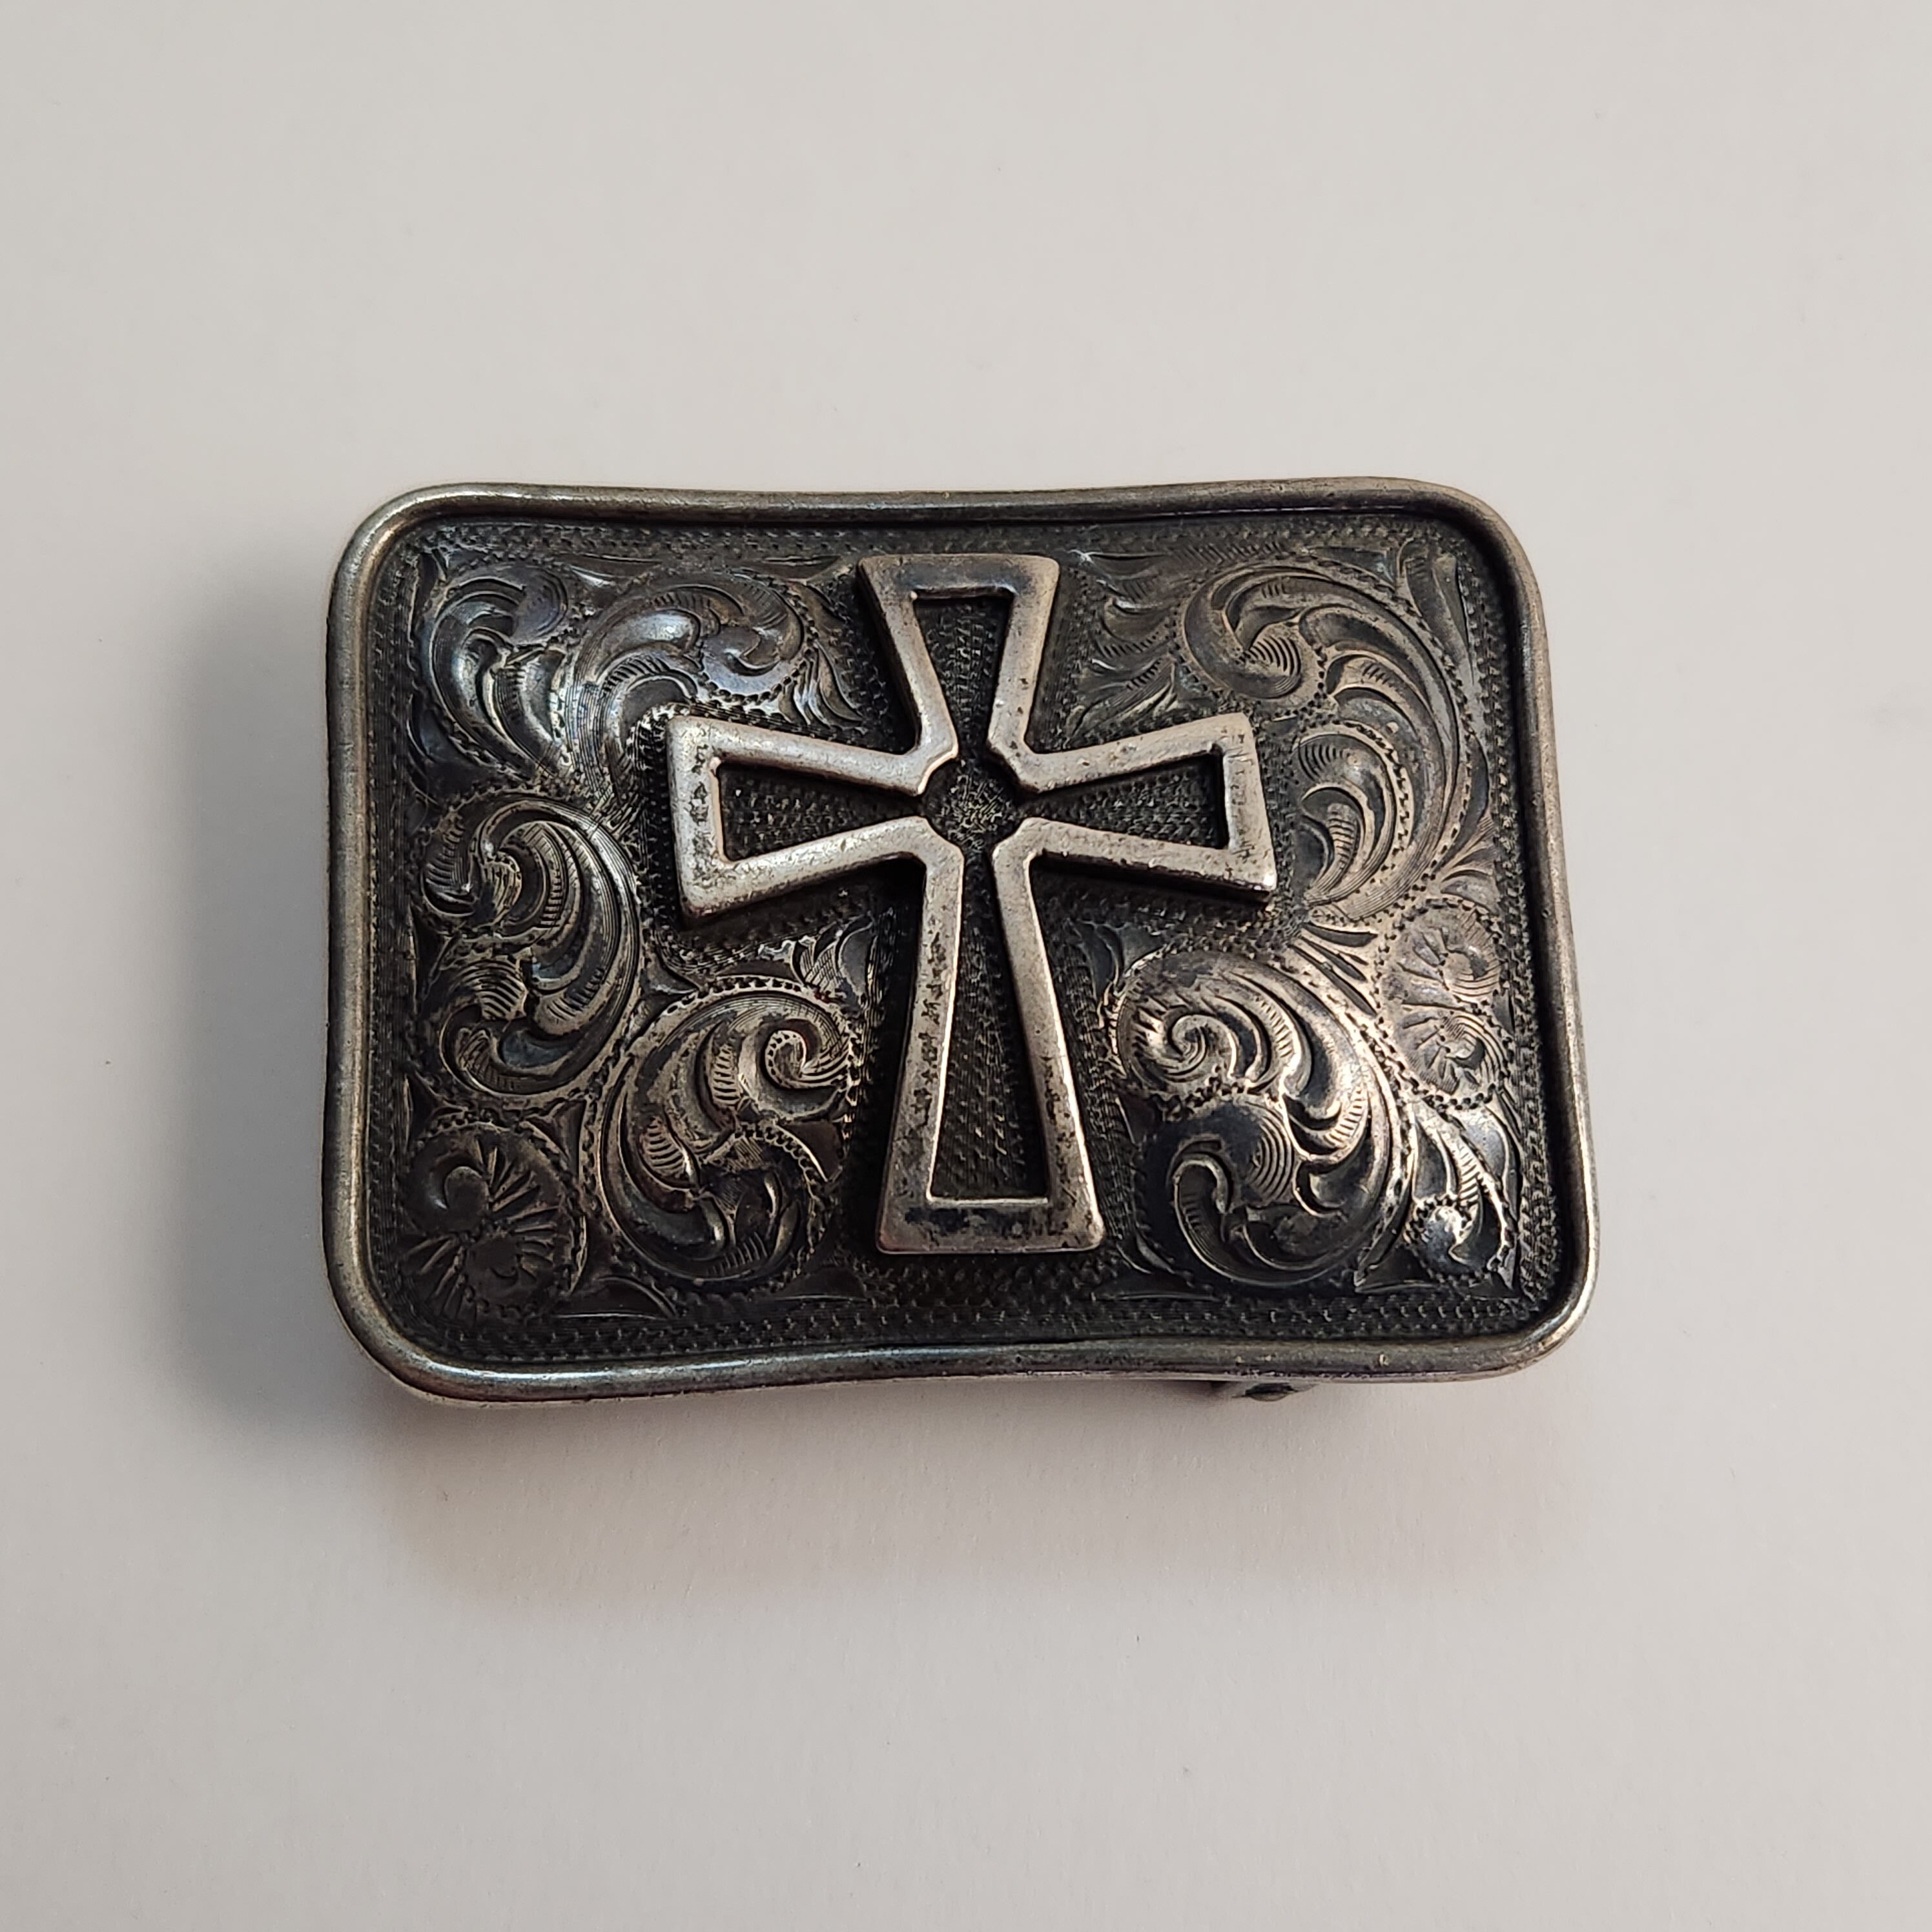 JohnAllenWoodward Clint Orms Martin Sterling Silver Buckle